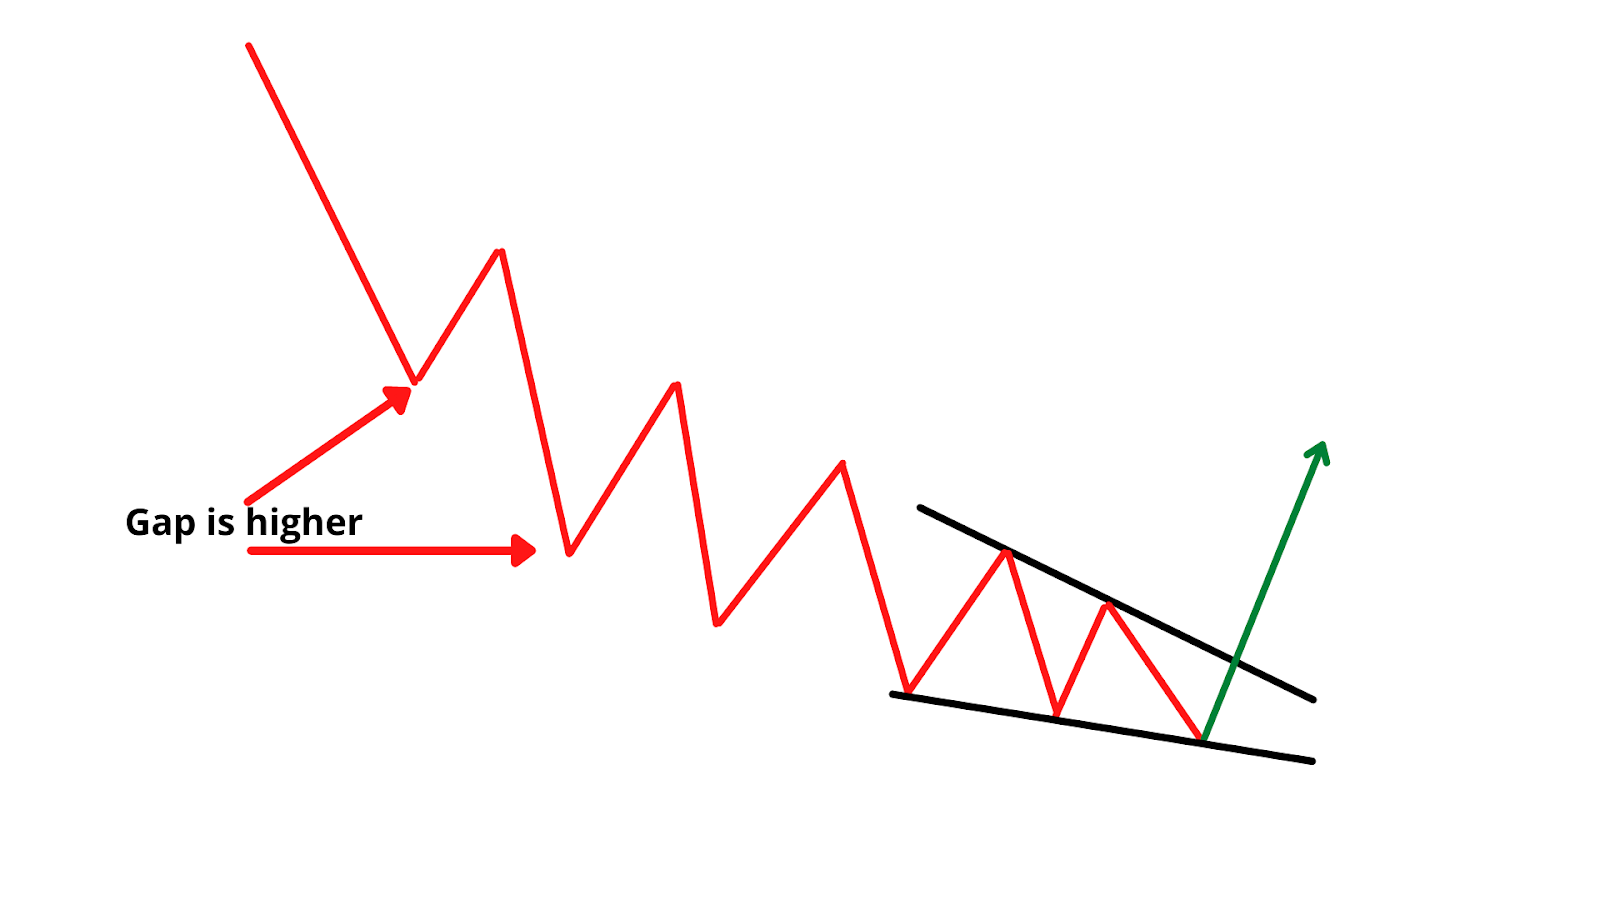 Strong downtrend